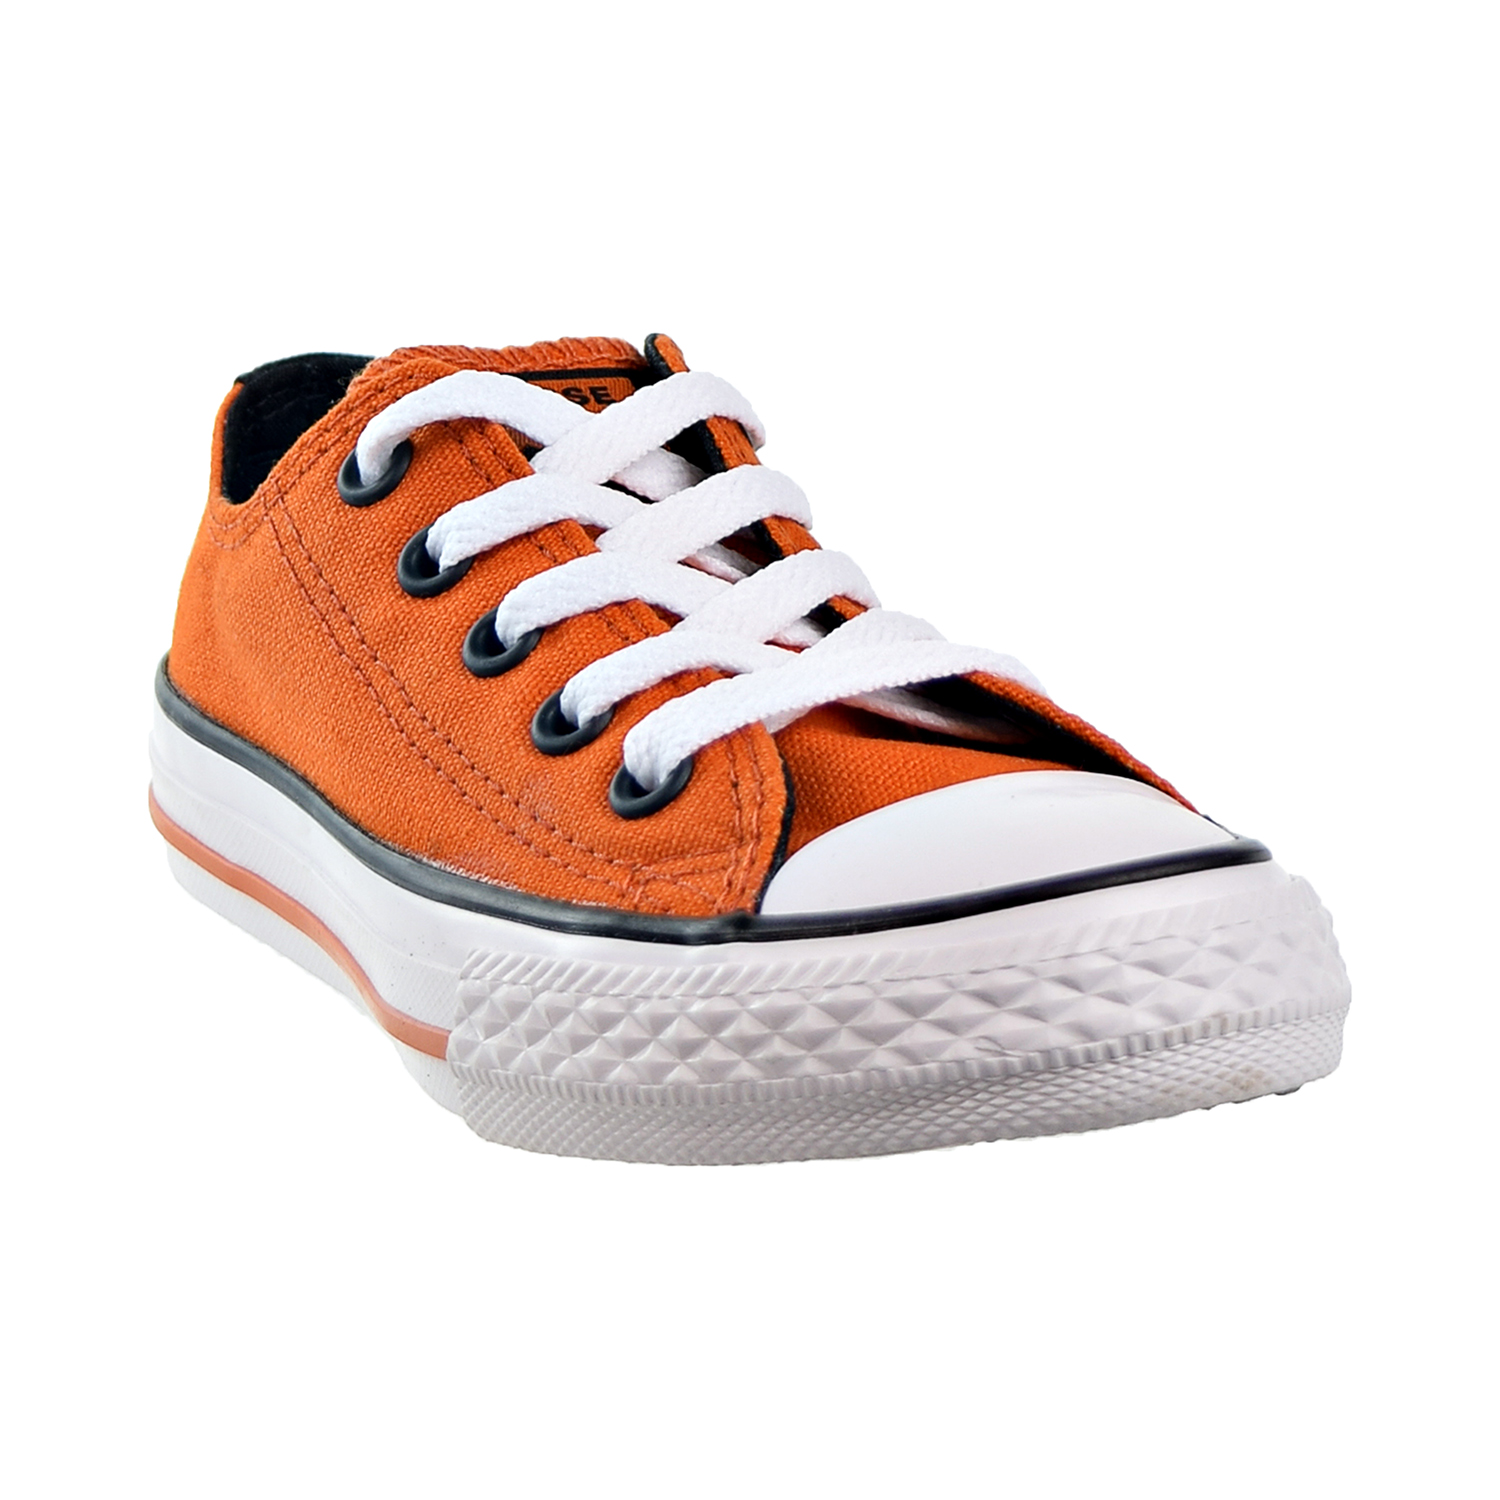 Converse Chuck Taylor All Star Ox Big Kids Shoes Campfire Orange-Black-White 661864f - image 2 of 6